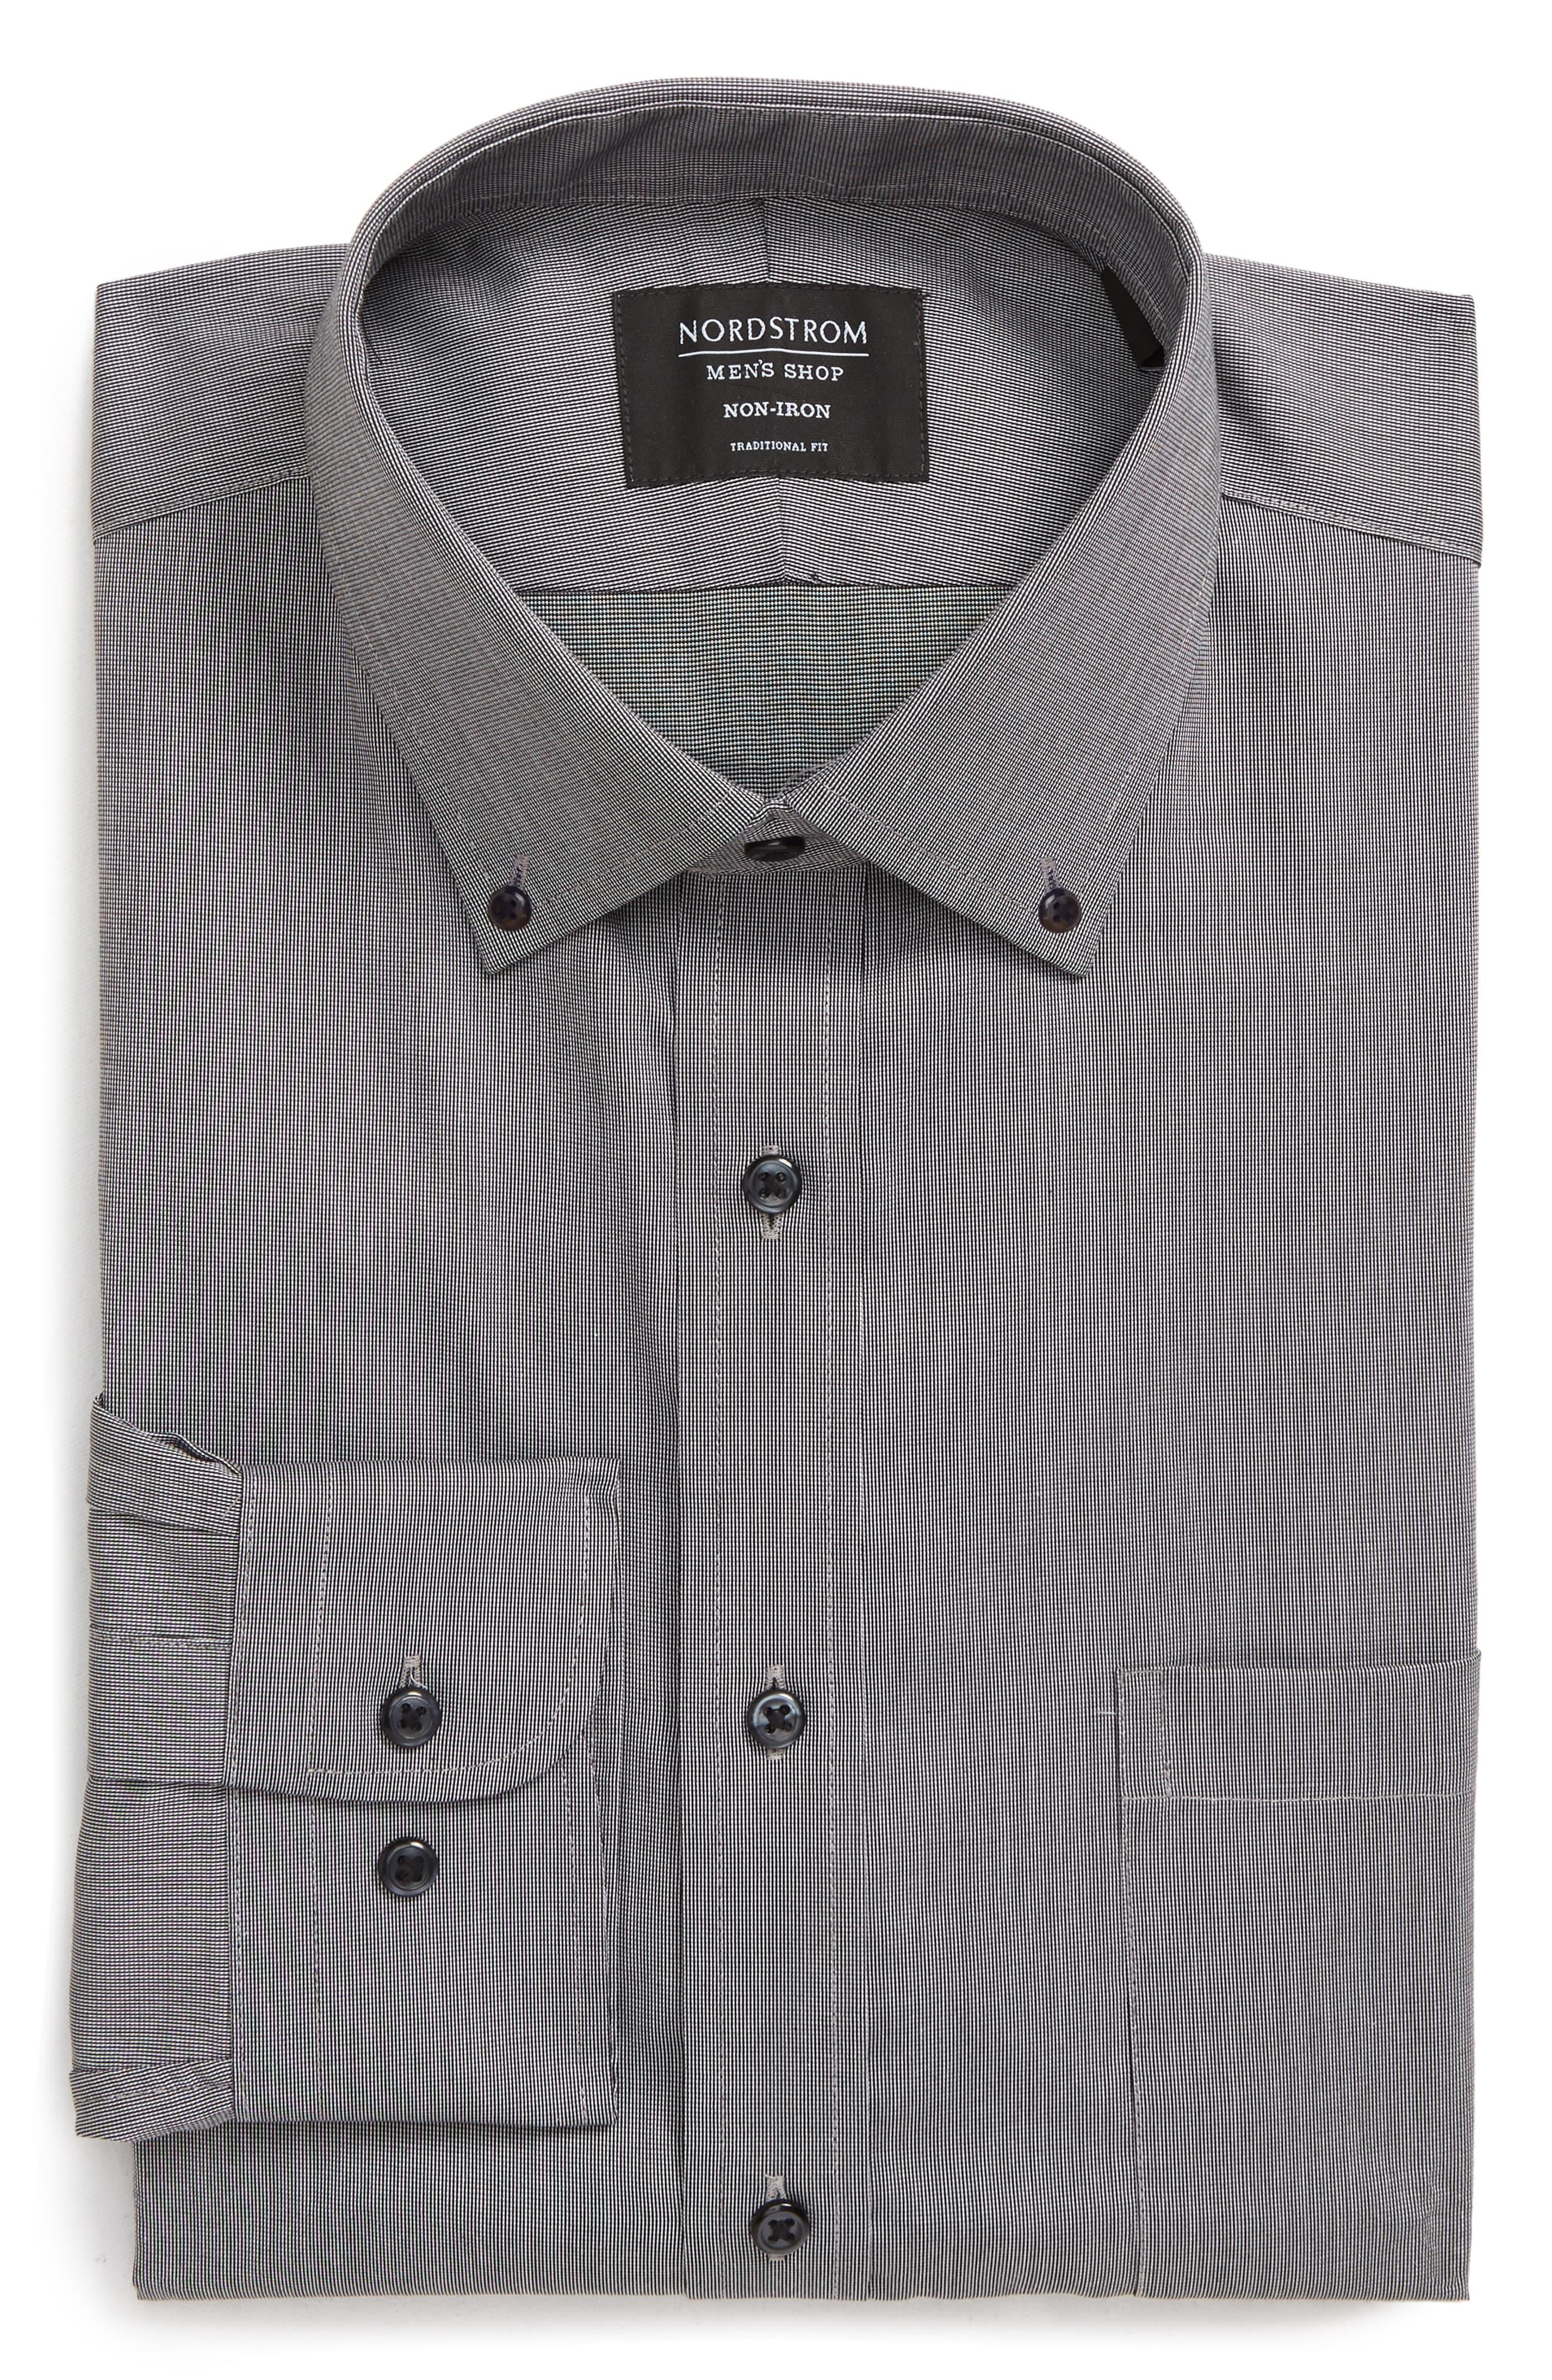 Nordstrom Traditional Fit Non-iron Dress Shirt in Gray for Men - Lyst